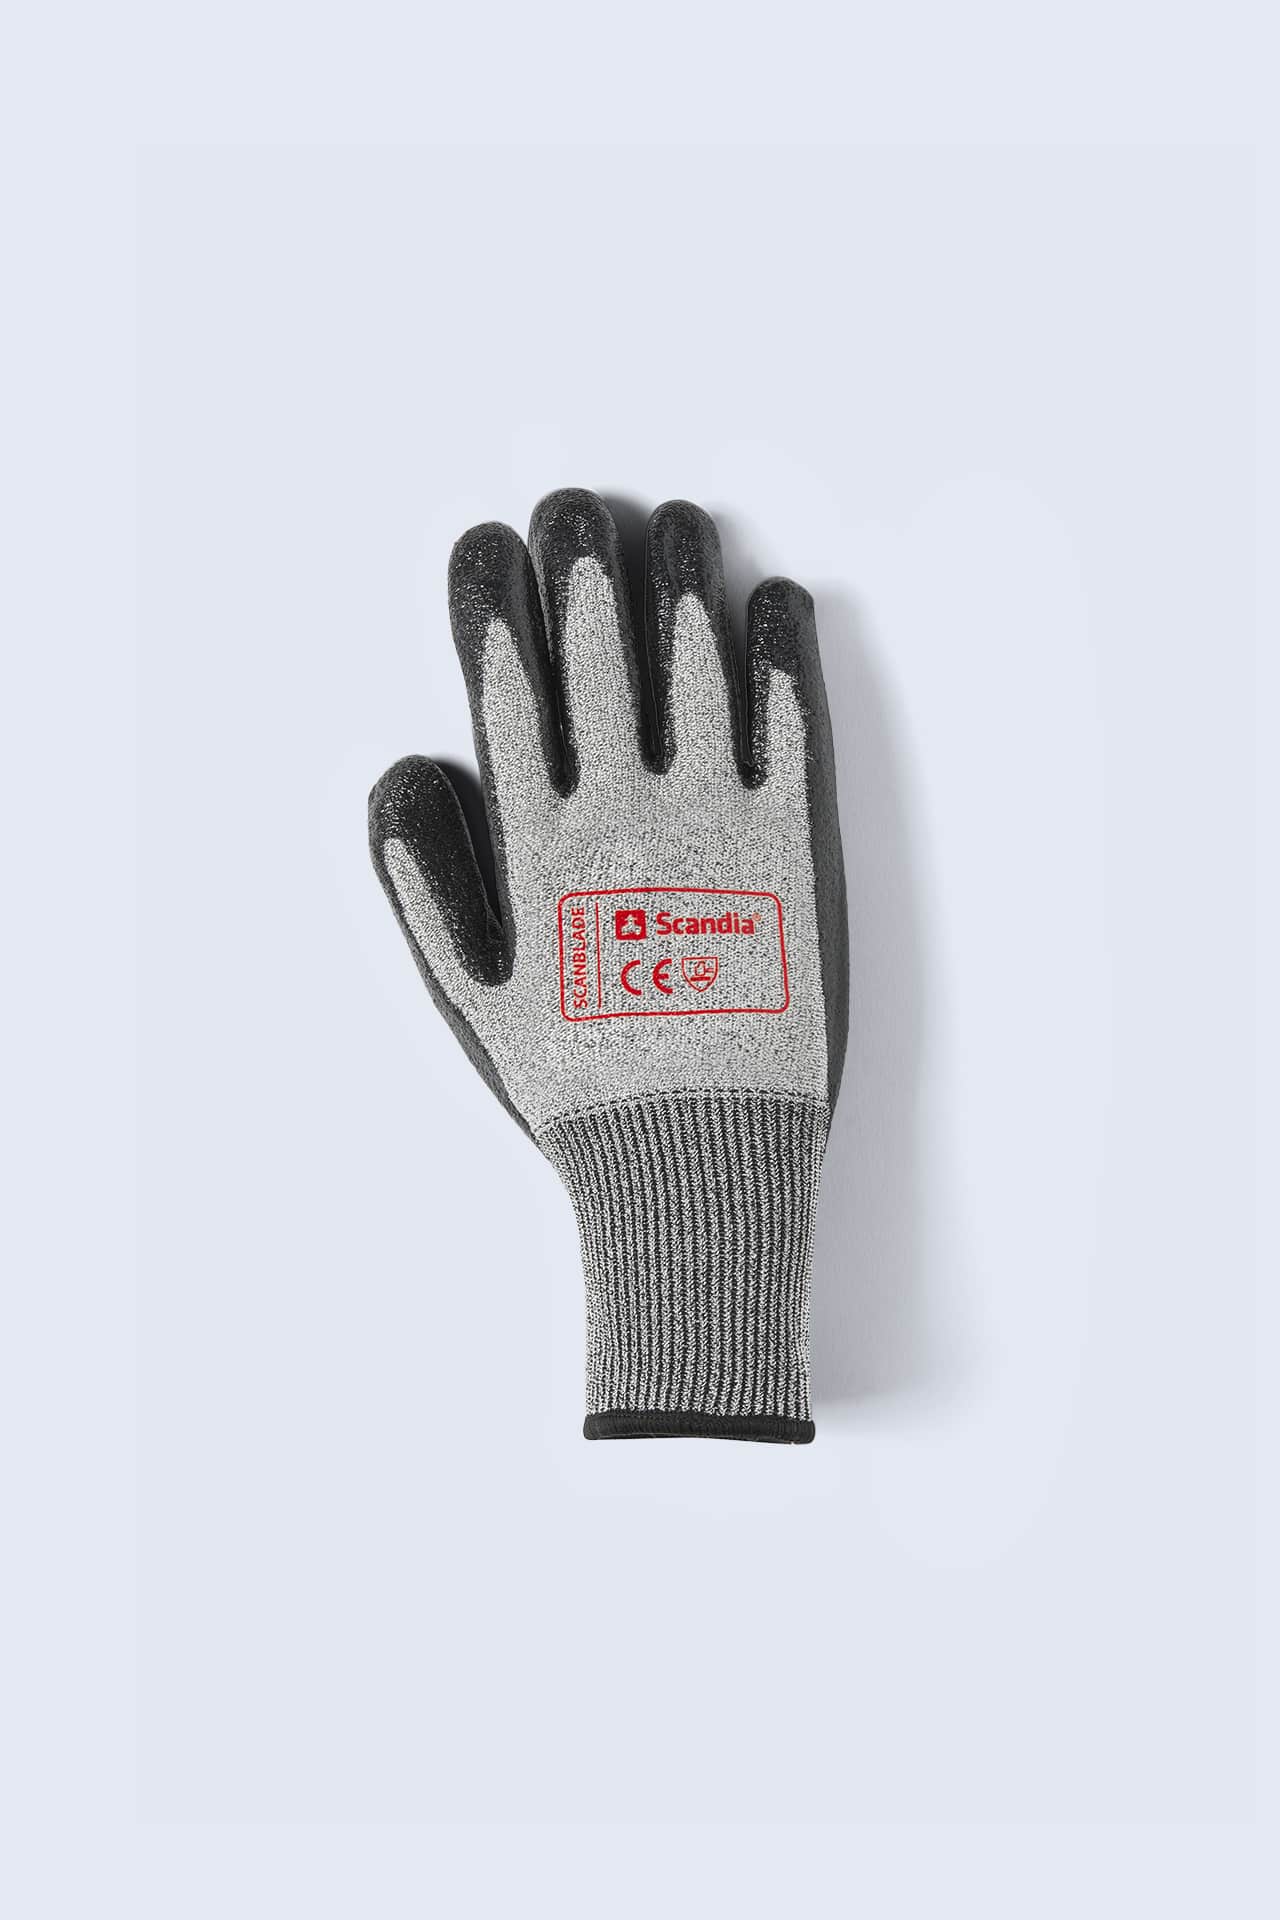 Knife Cut Resistant Gloves Level 5 Protection for Industrial, Size: Medium  at Rs 200/pair in Nashik